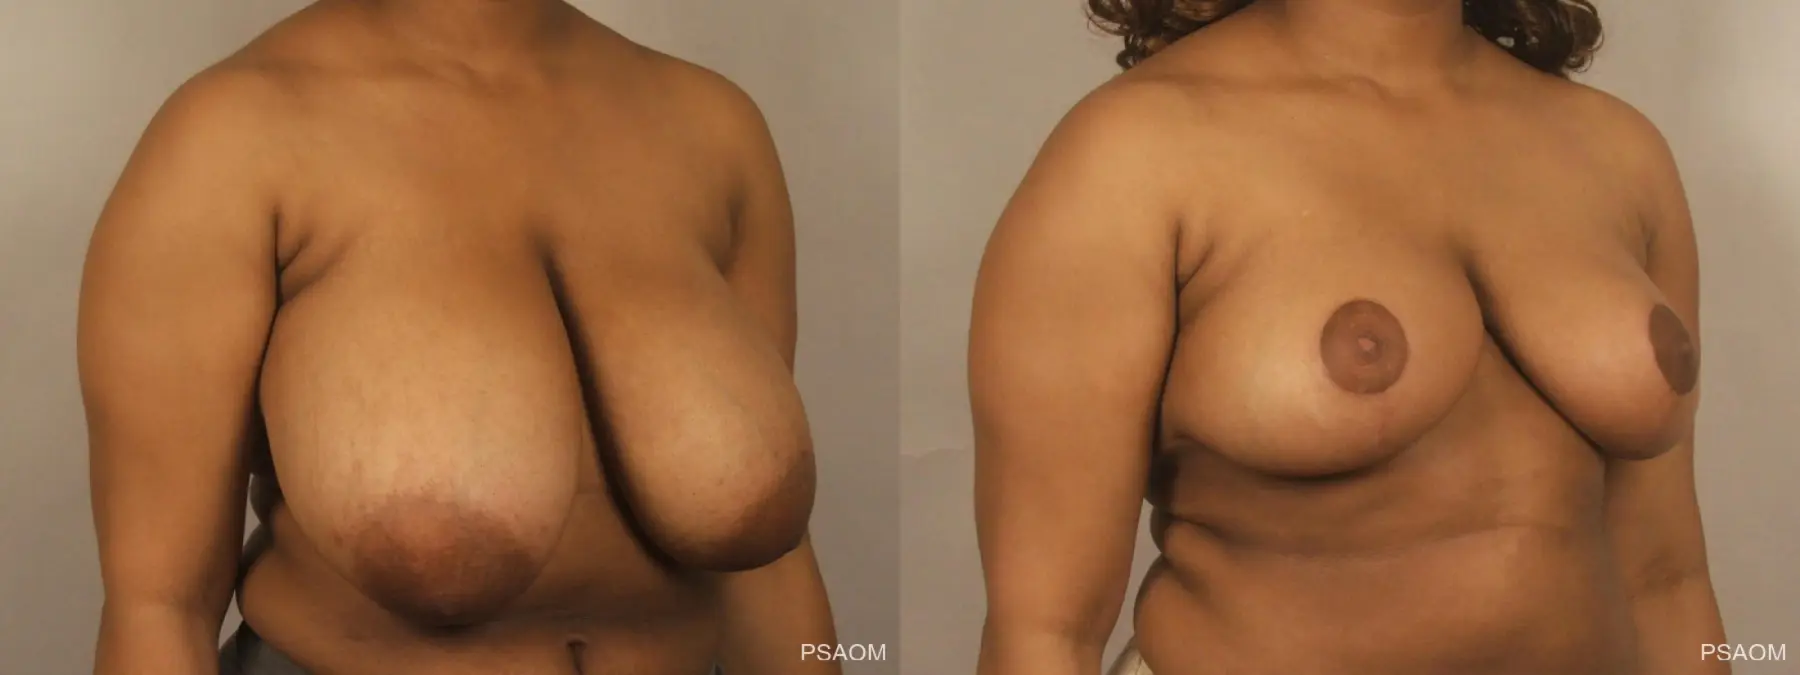 Breast Reduction: Patient 6 - Before and After 3